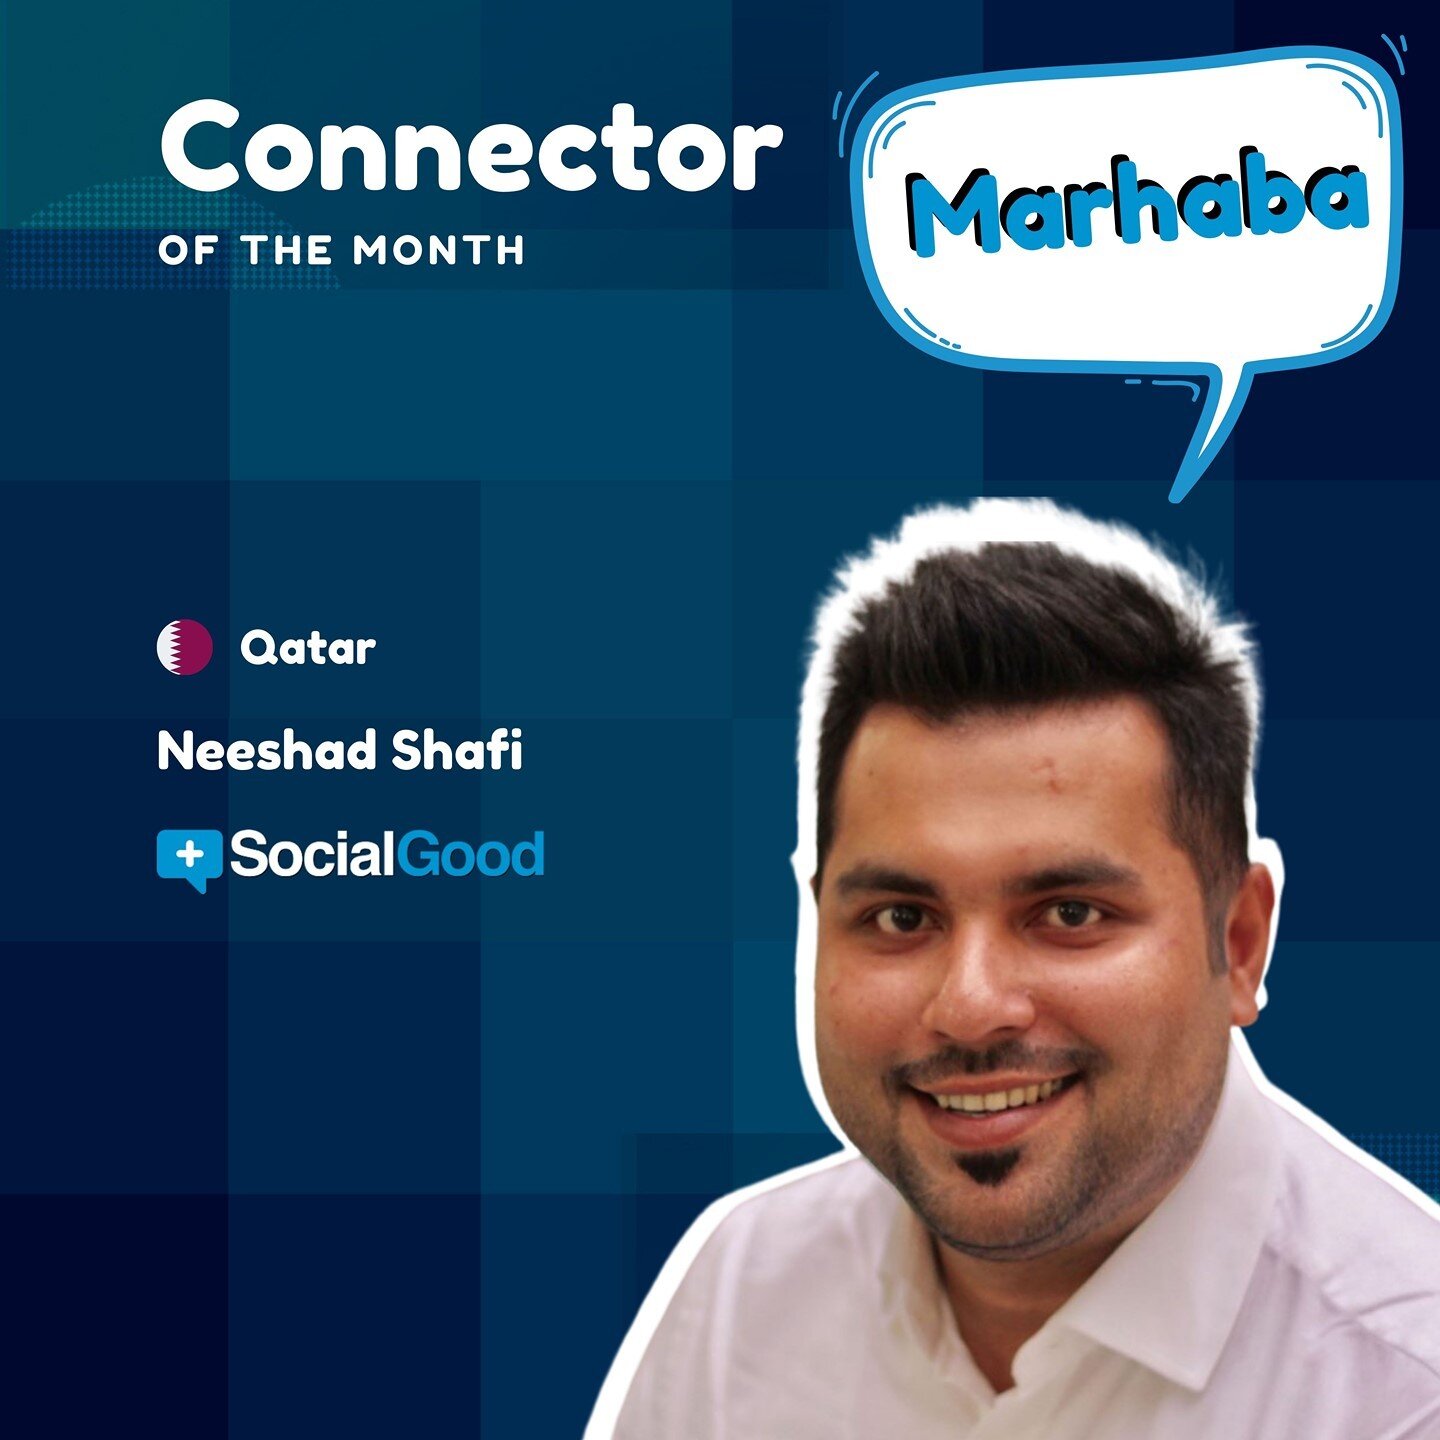 Meet our Connector of the month, Neeshad Shafi @neeshad 

He is an environmentalist, educator, and social change advocate based in Doha, Qatar. He is the Co-Founder &amp; Executive Director of Arab Youth Climate Movement Qatar (@AYCMQA), the first an